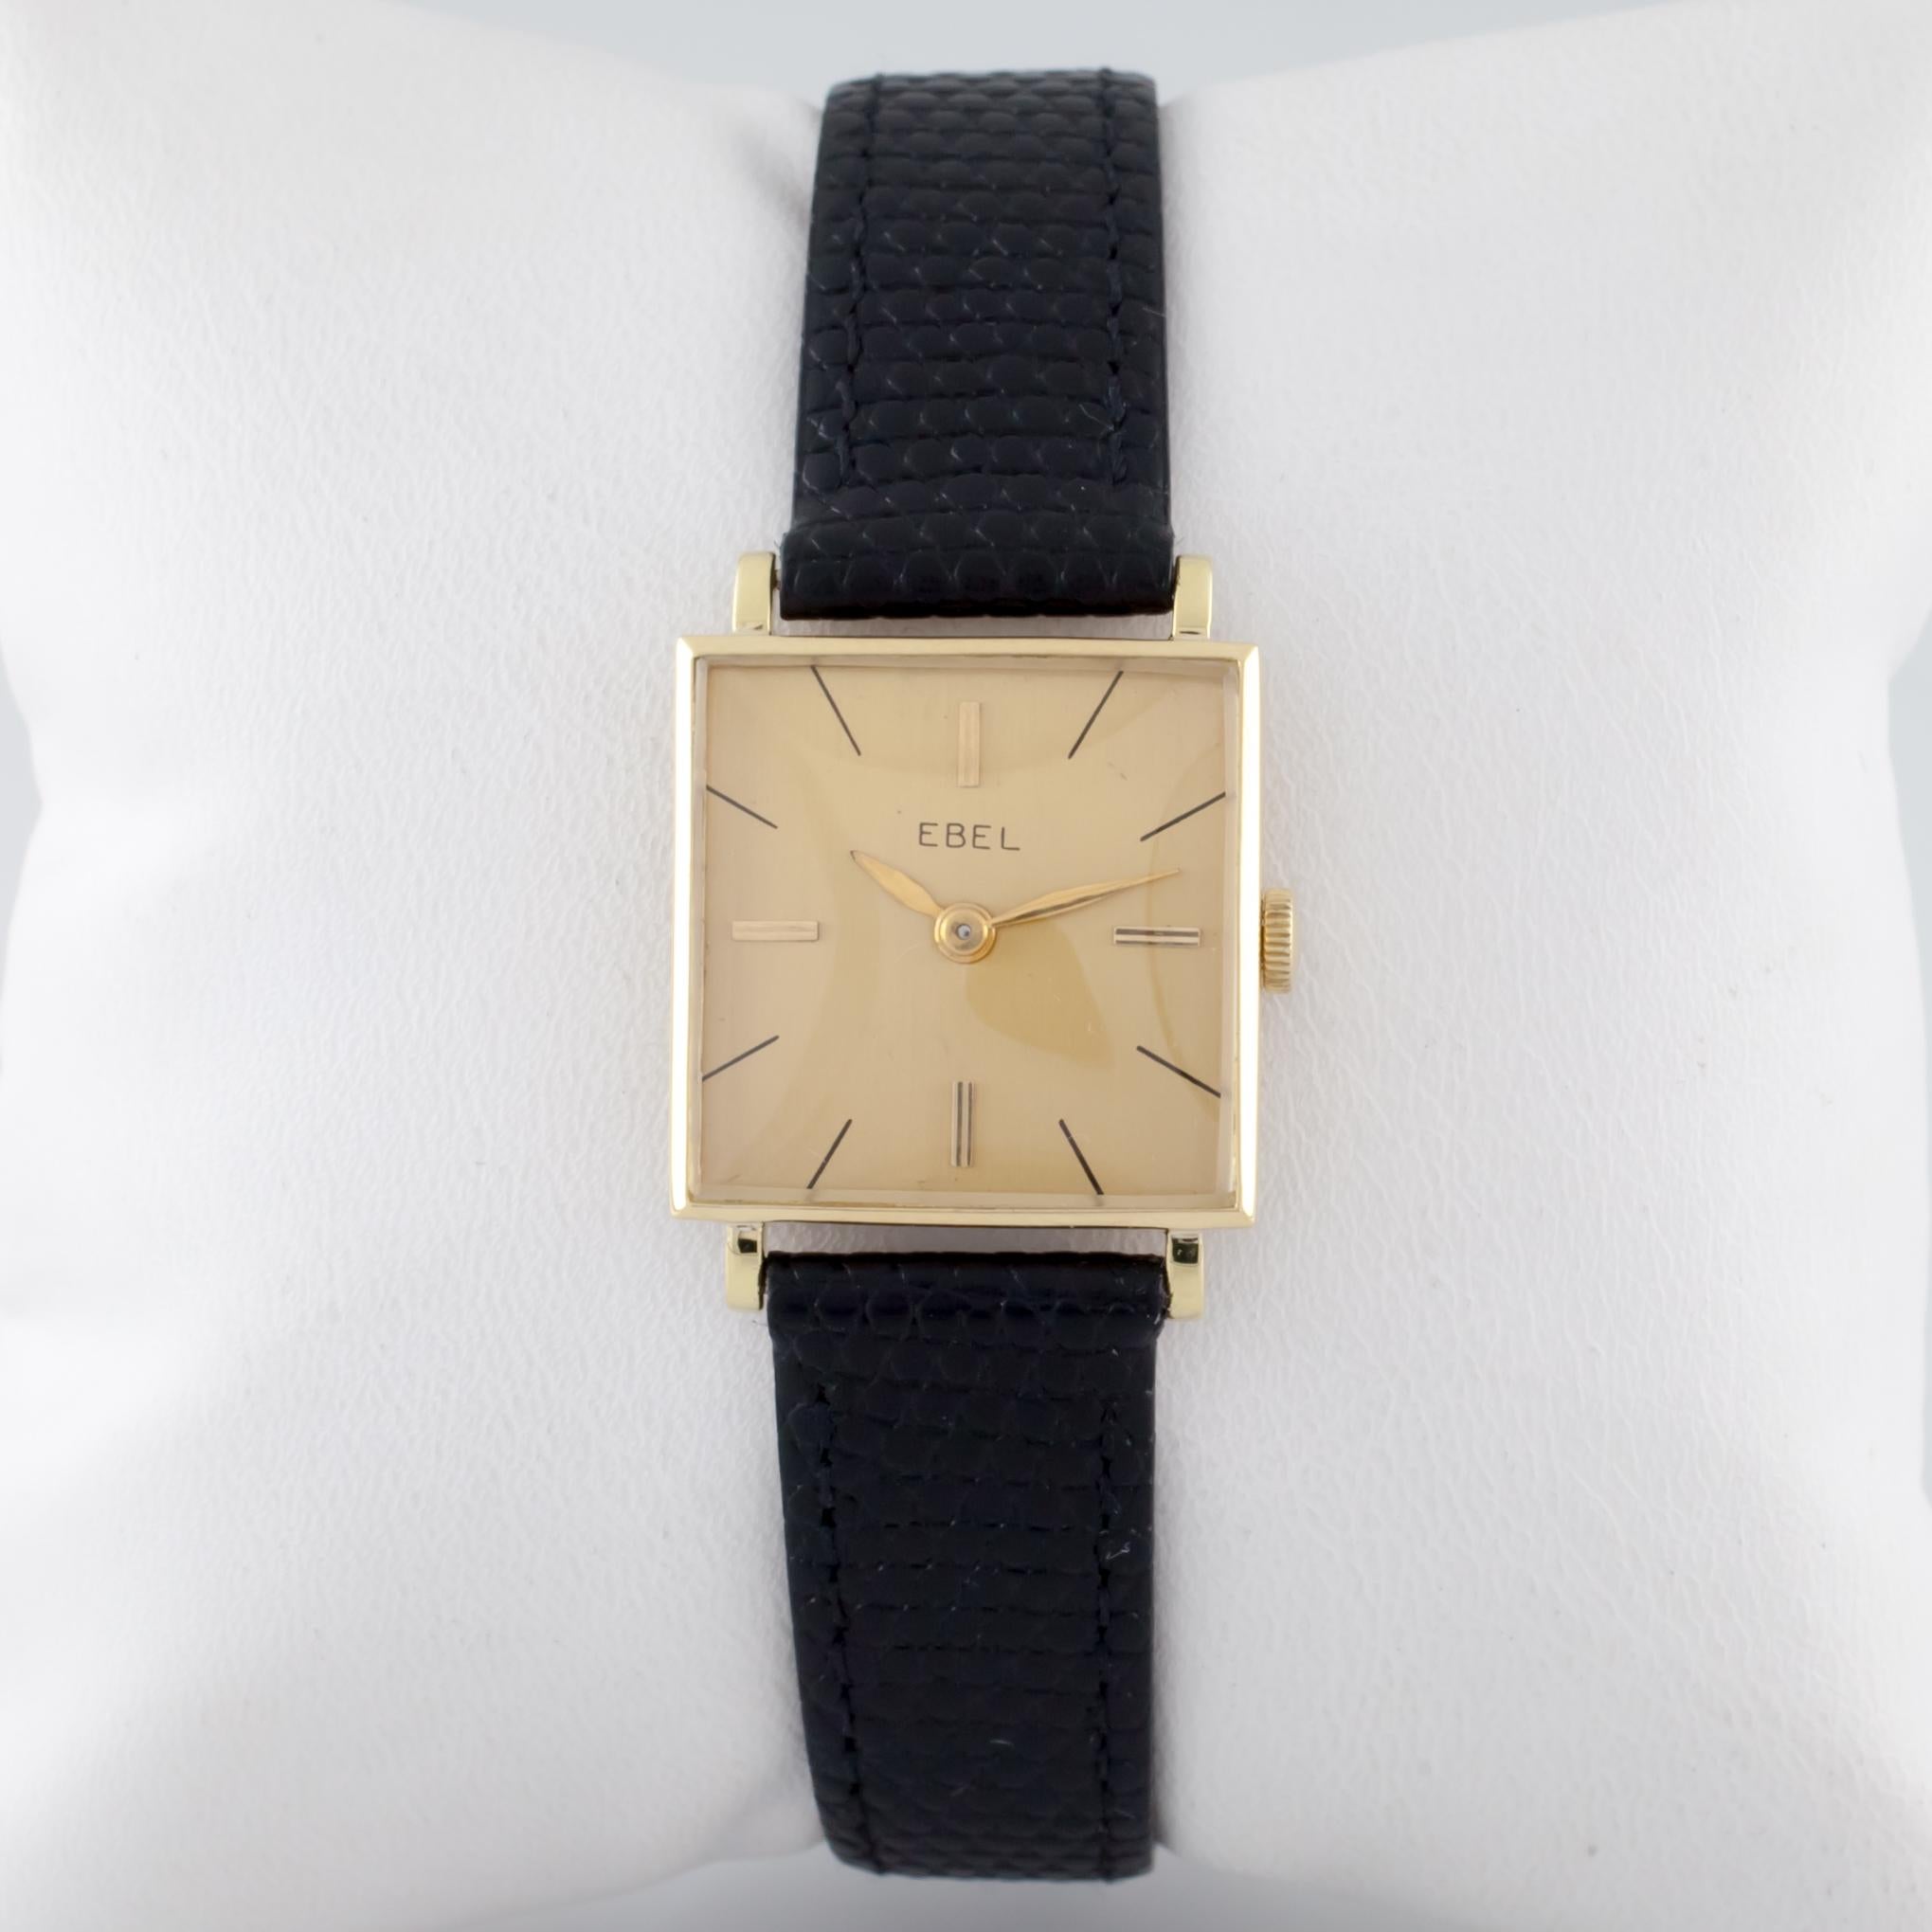 Movement #78 ETA 2512
Case #878-41
18k Yellow Gold Square Case
21 mm Wide (22 mm w/ Crown)
21 mm Long
Lug-to-Lug Width = 15 mm
Lug-to-Lug Distance = 28 mm
Thickness = 6 mm
Gold Dial w/ Gold Tic Marks and Hands (M + H)
19 mm Wide
19 mm Long
Black